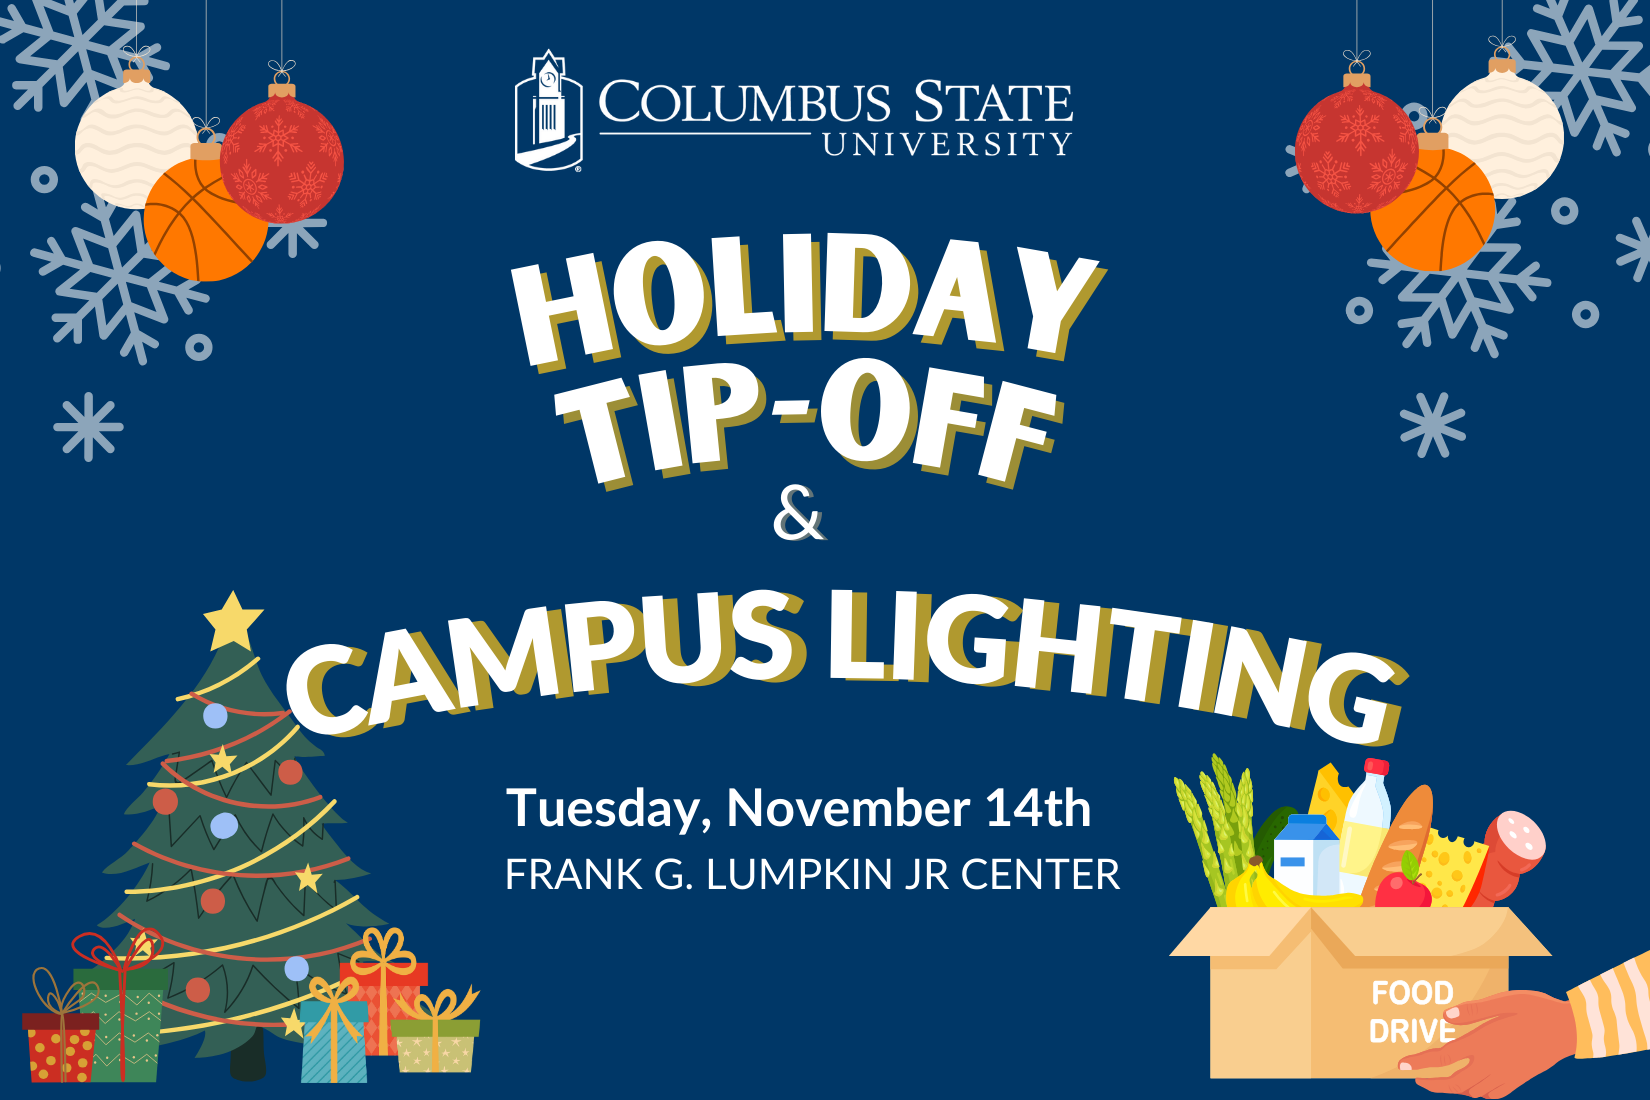 Columbus State University logo, Holiday Tip-off and Campus Lighting, Tuesday, November 14, Frank G. Lumpkin Jr. Center, holiday tree and other graphics, food drive graphic